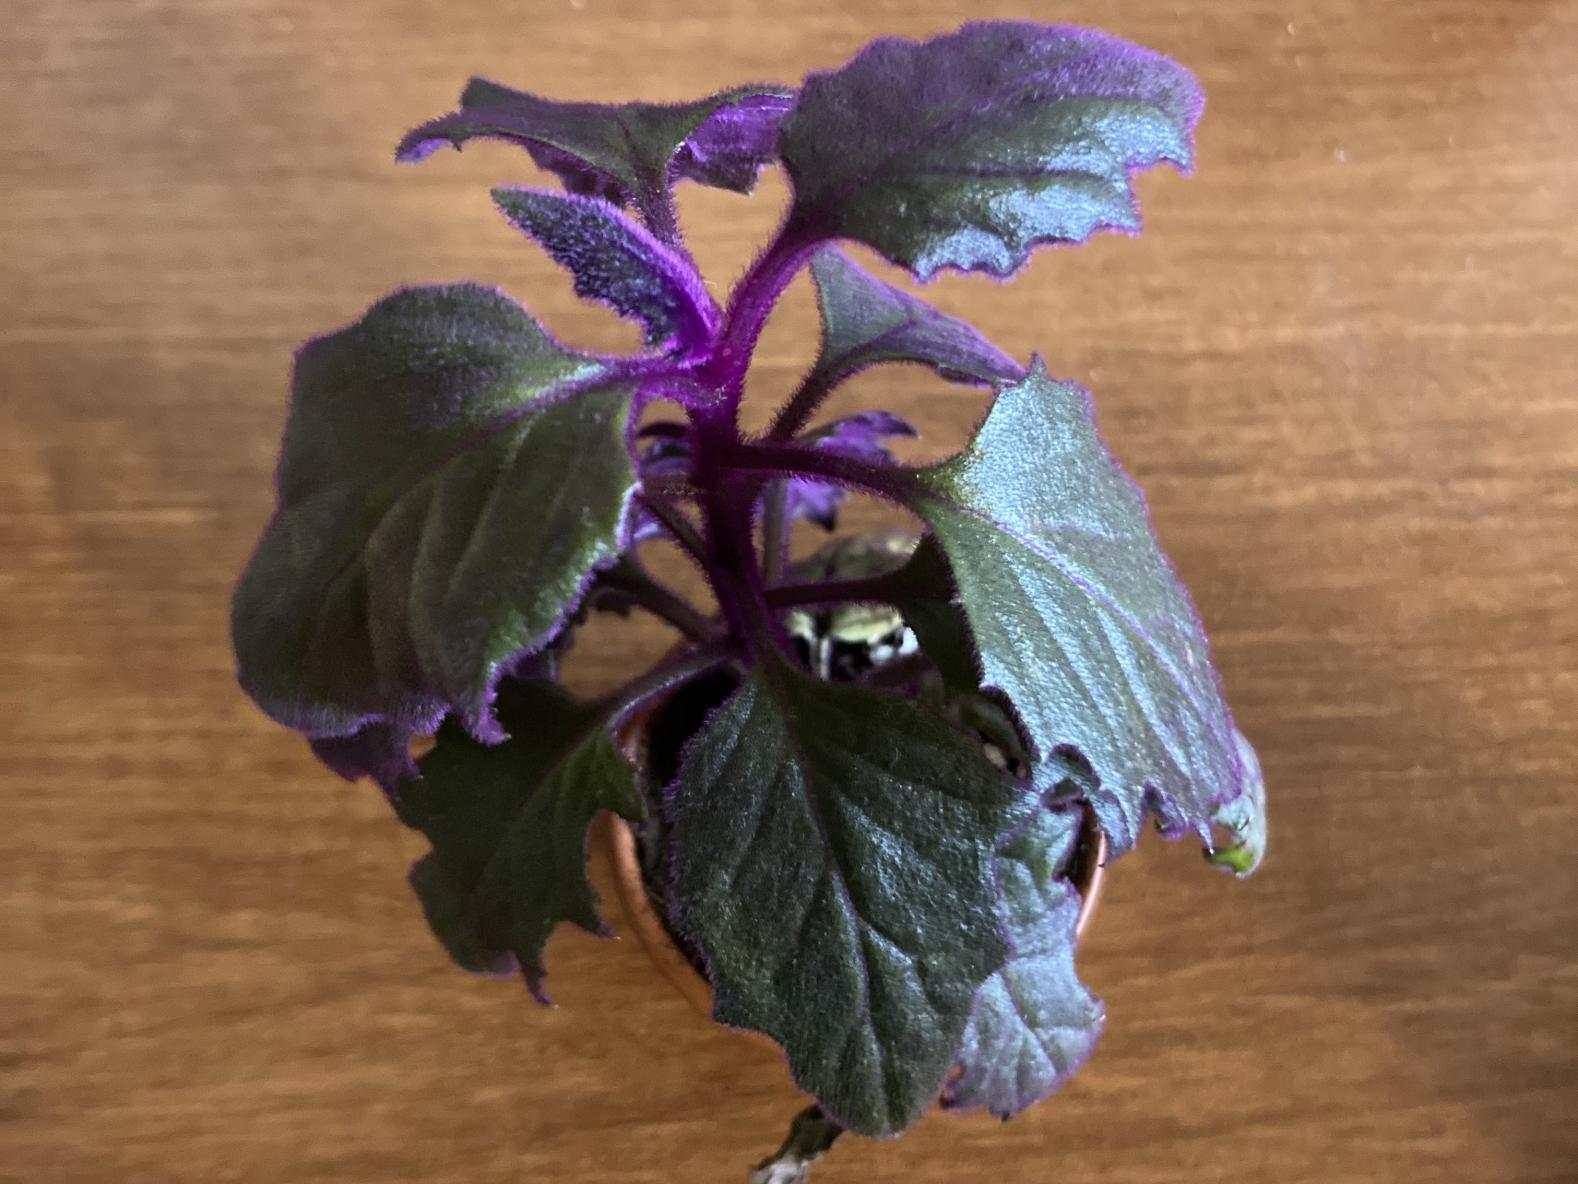 Purple plant, very hard to read right now